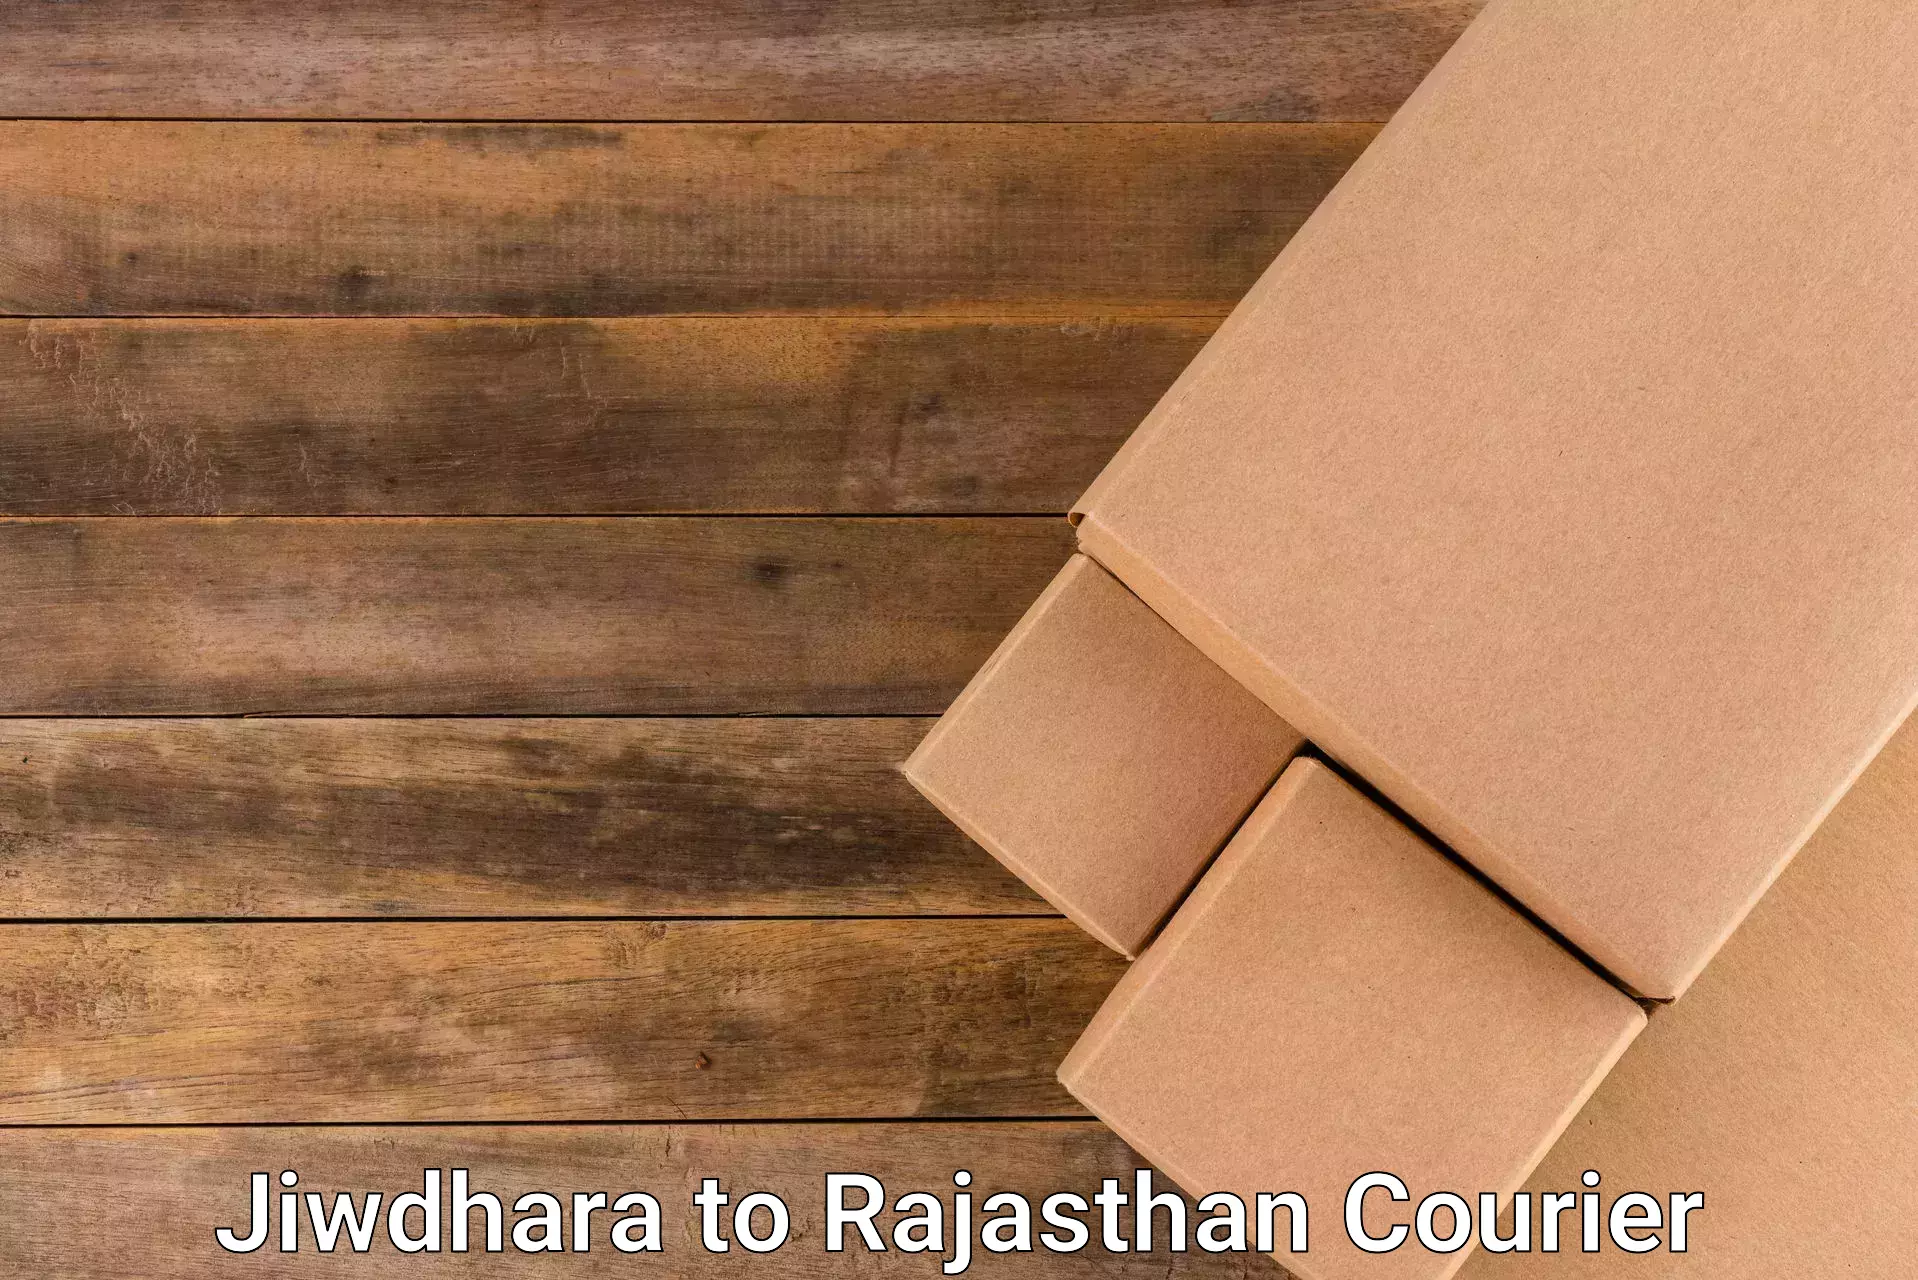 Local delivery service Jiwdhara to Rajasthan